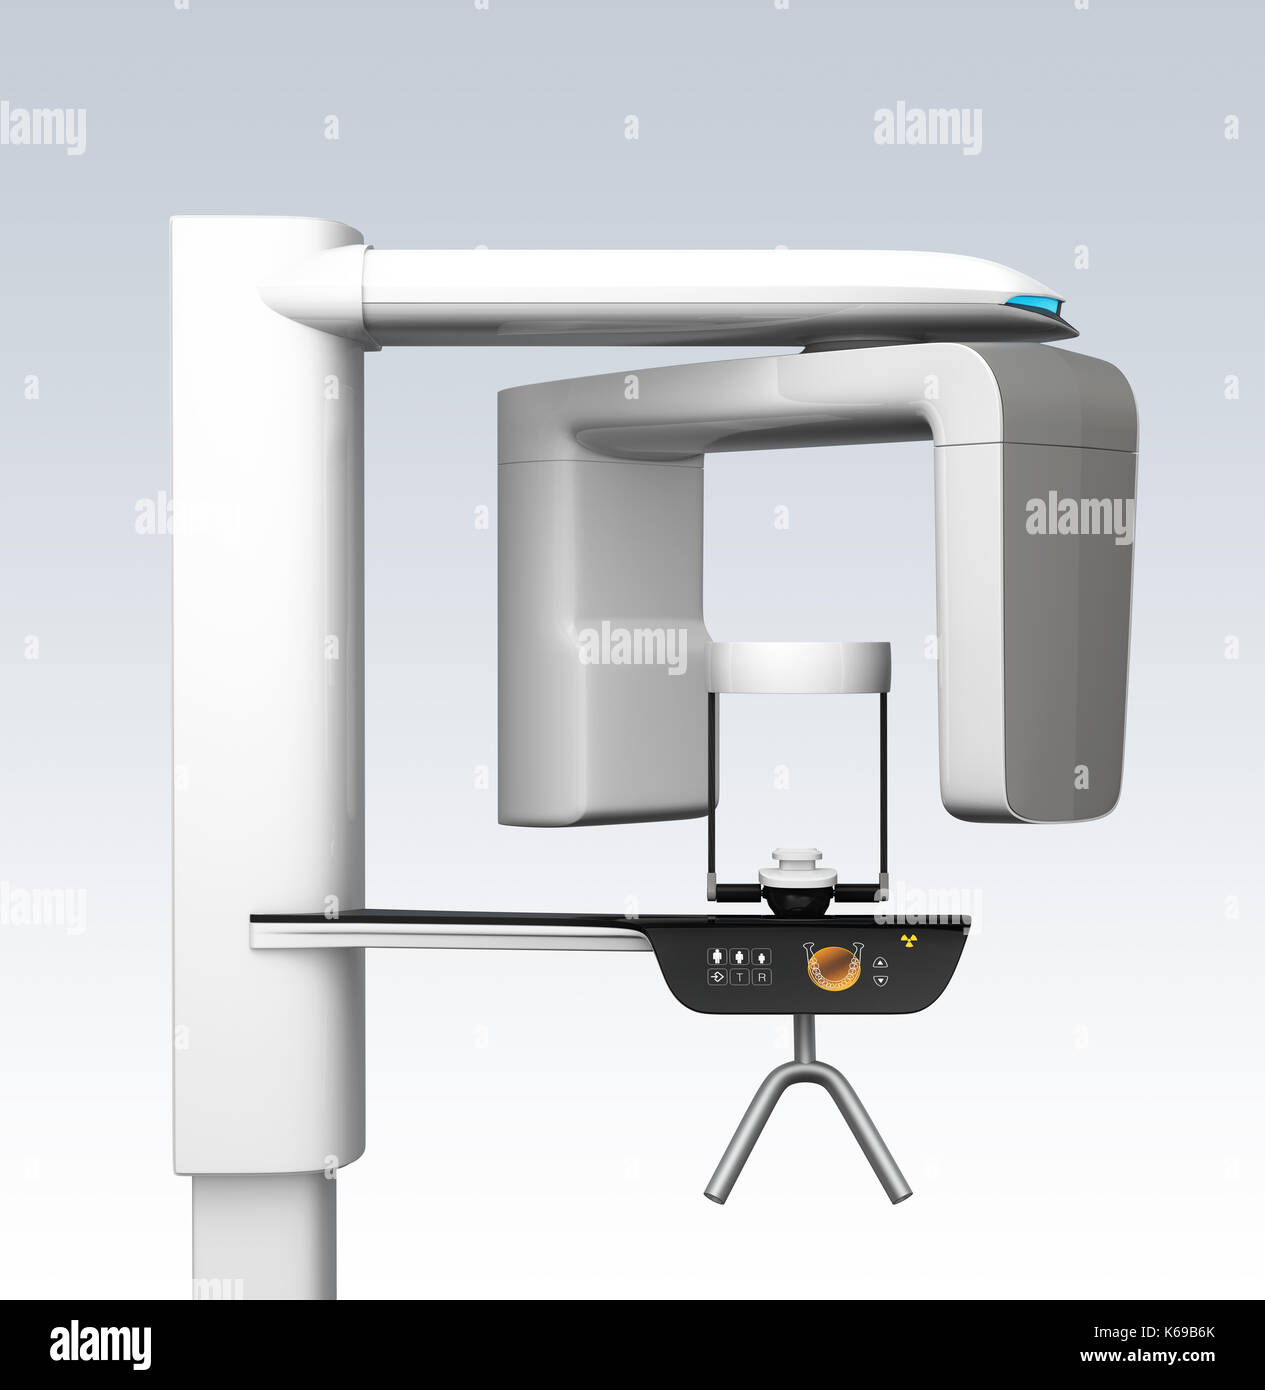 Dental X-ray machine isolated on gradient background. 3D rendering image. Stock Photo